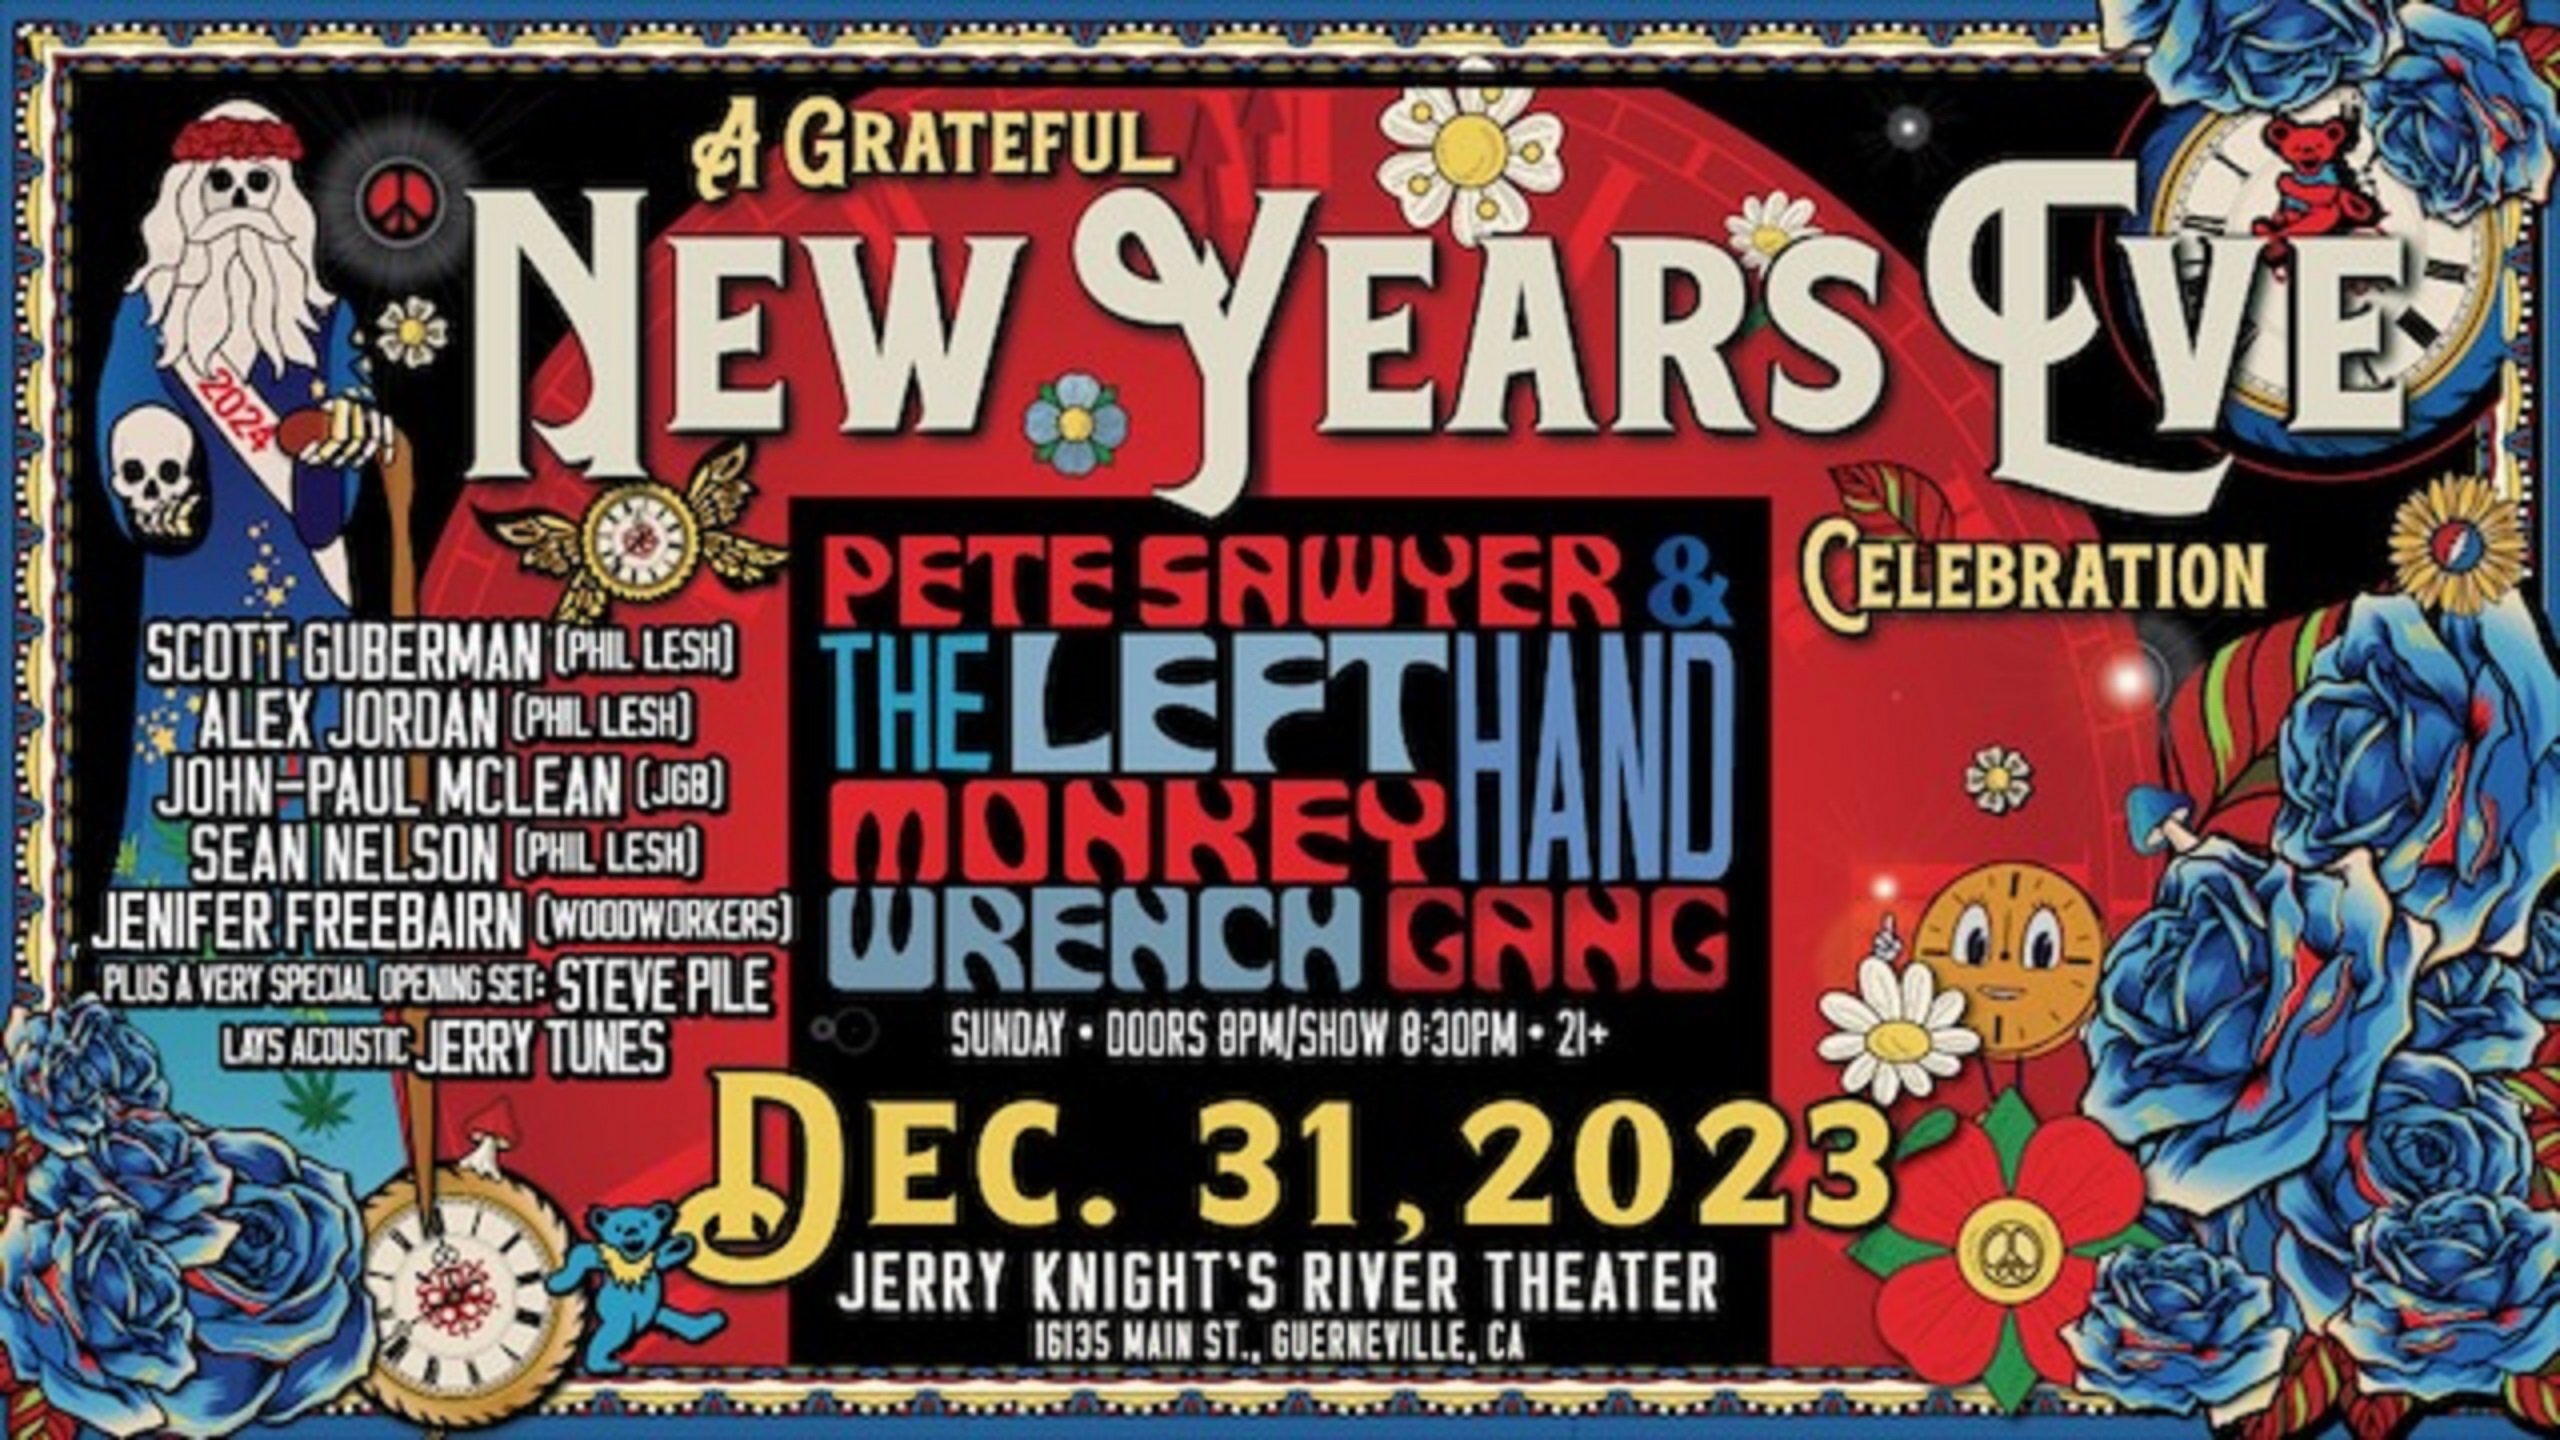 A Grateful (Dead) New Years Eve with Pete Sawyer and The Left Hand Monkey Wrench Gang in Guerneville, CA